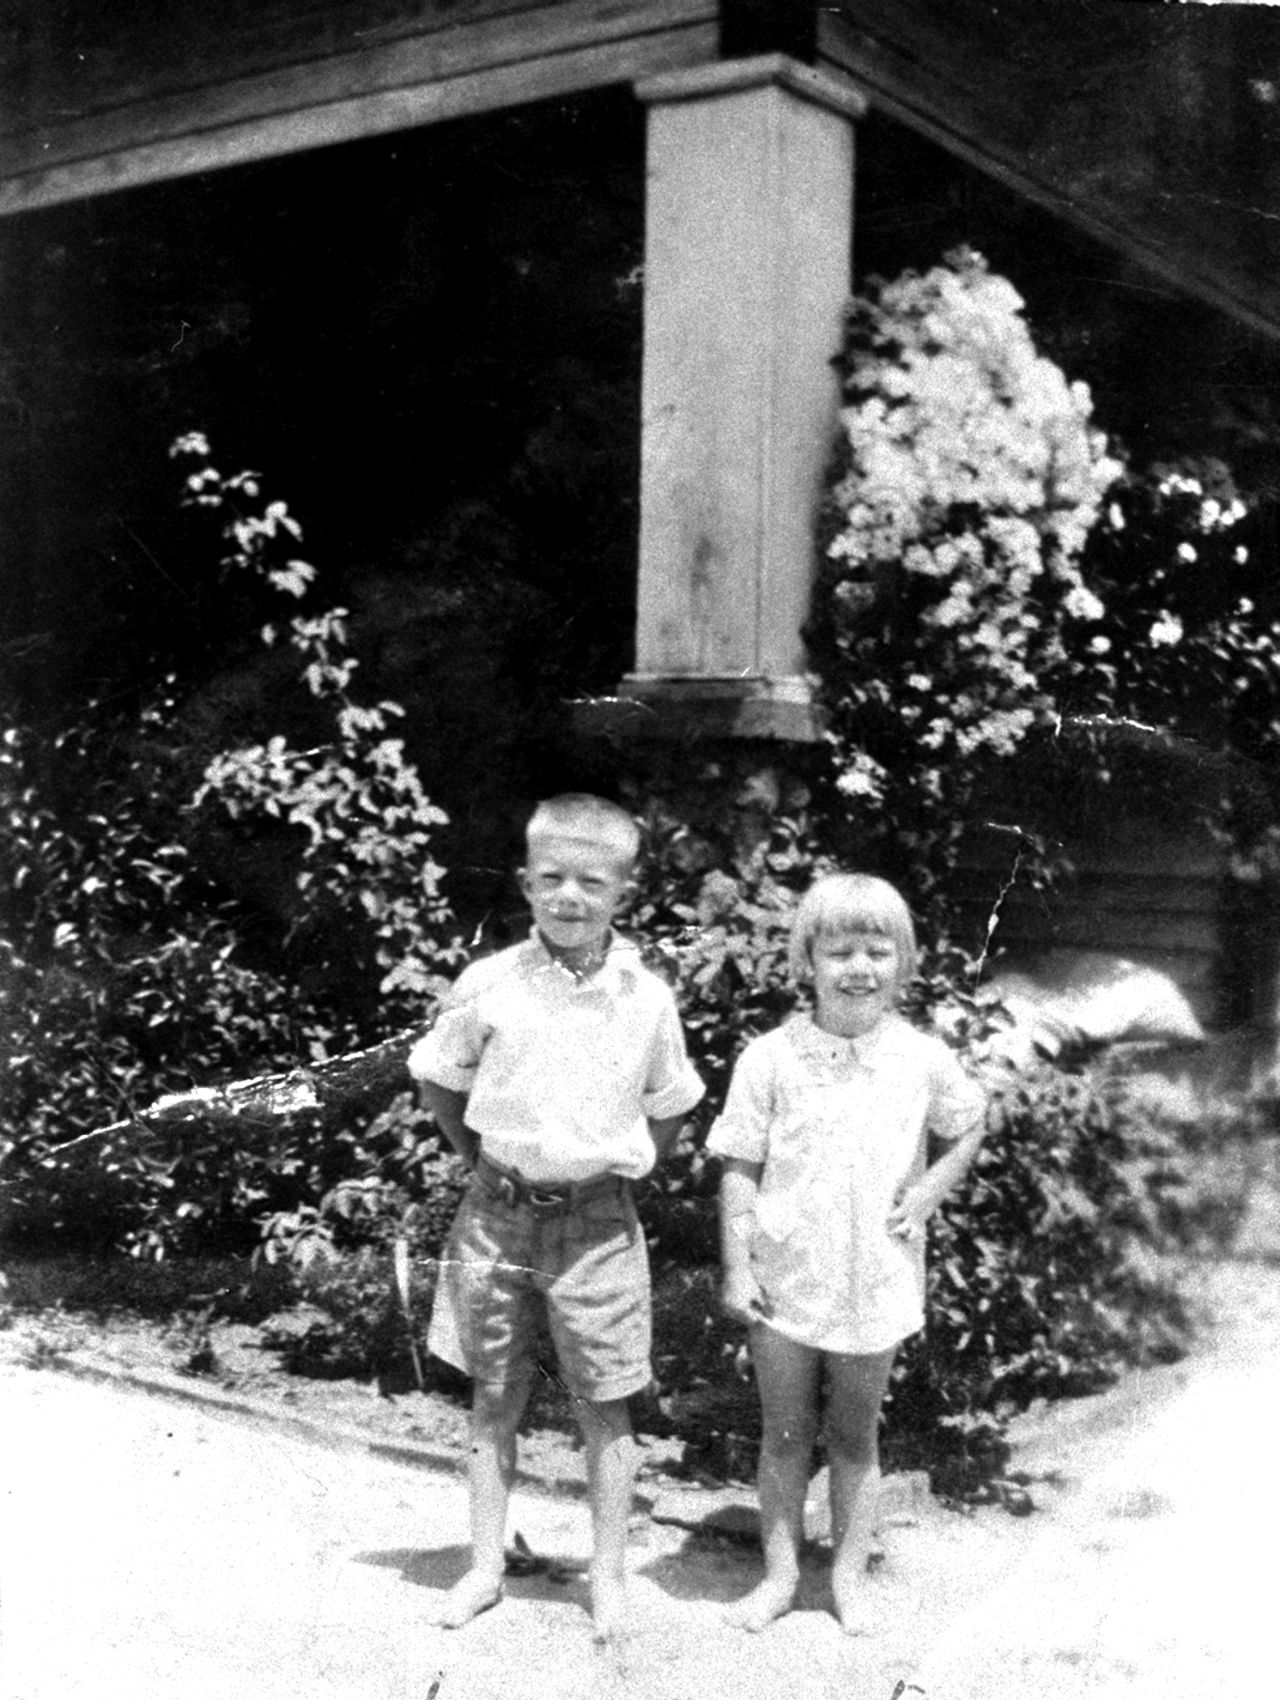 Carter, 6, poses with his sister Gloria in their hometown of Plains, Georgia, in 1931.